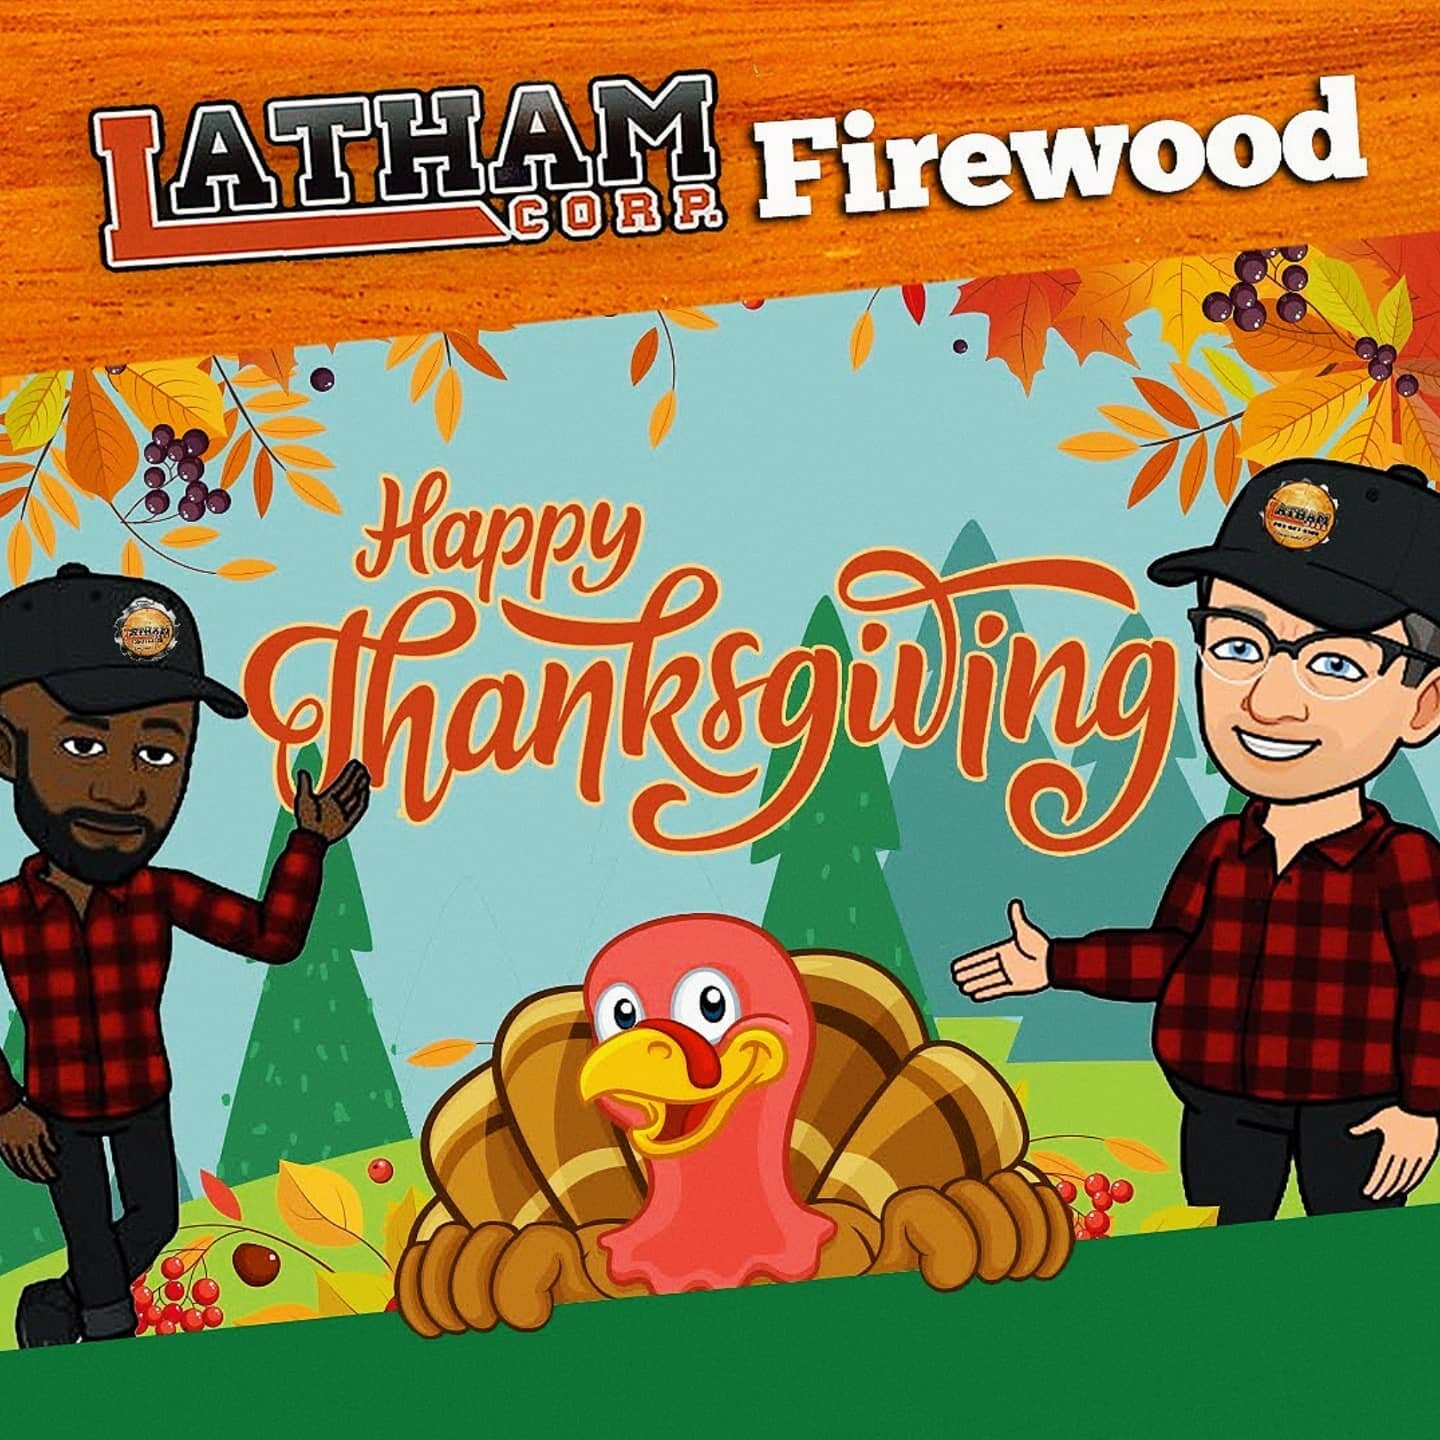 Gobble Gobble! 🦃🍴🍗 Latham Corp would like wish everyone a warm and toasty #Friendsgiving &amp; #Thanksgiving! We are thankful for all of our customers in #Griswold, #Lisbon, #Pawcatuck #Plainfield #Preston #Waterford, #Voluntown #Willimantic and a